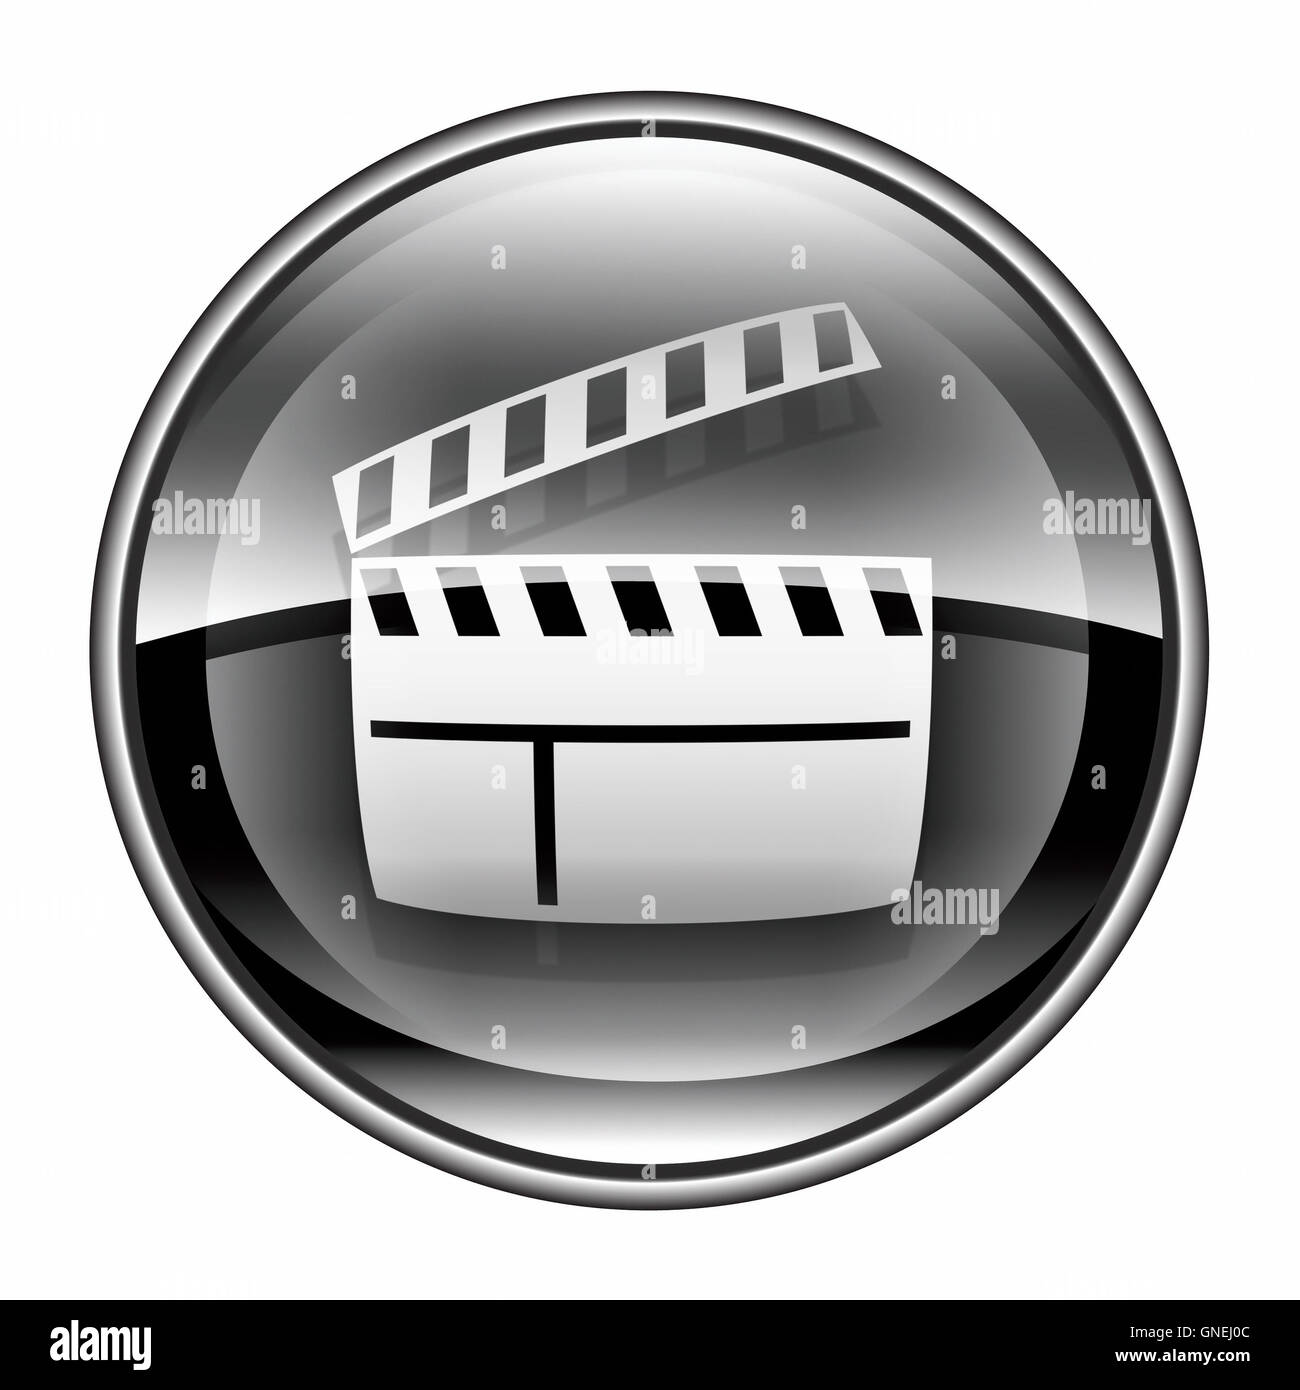 movie clapper board icon black, isolated on white background. Stock Photo